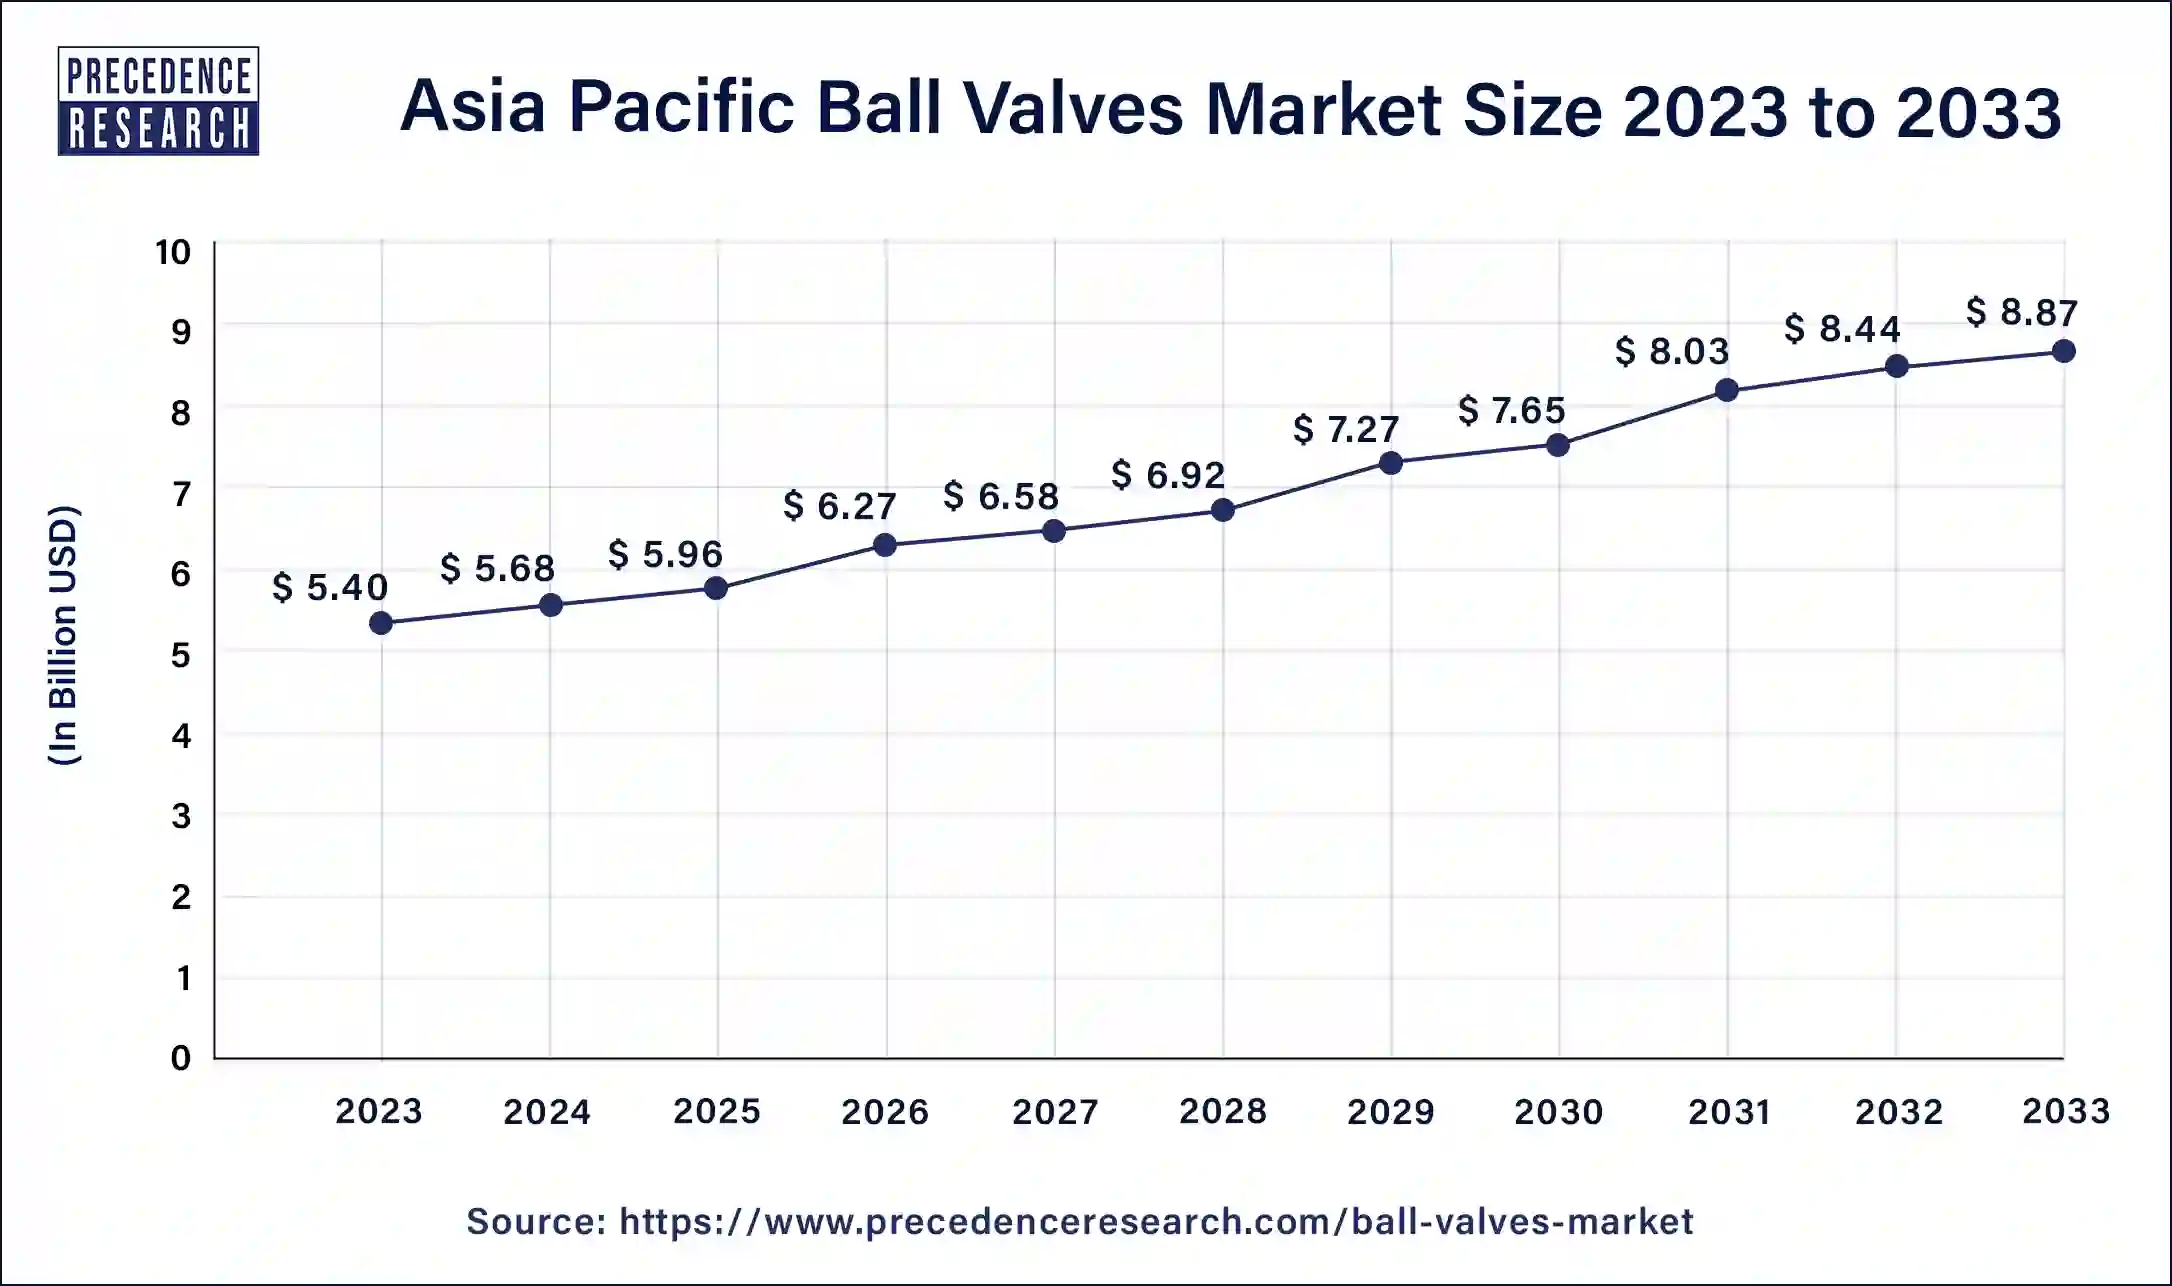 Asia Pacific Ball Valves Market Size 2024 to 2033